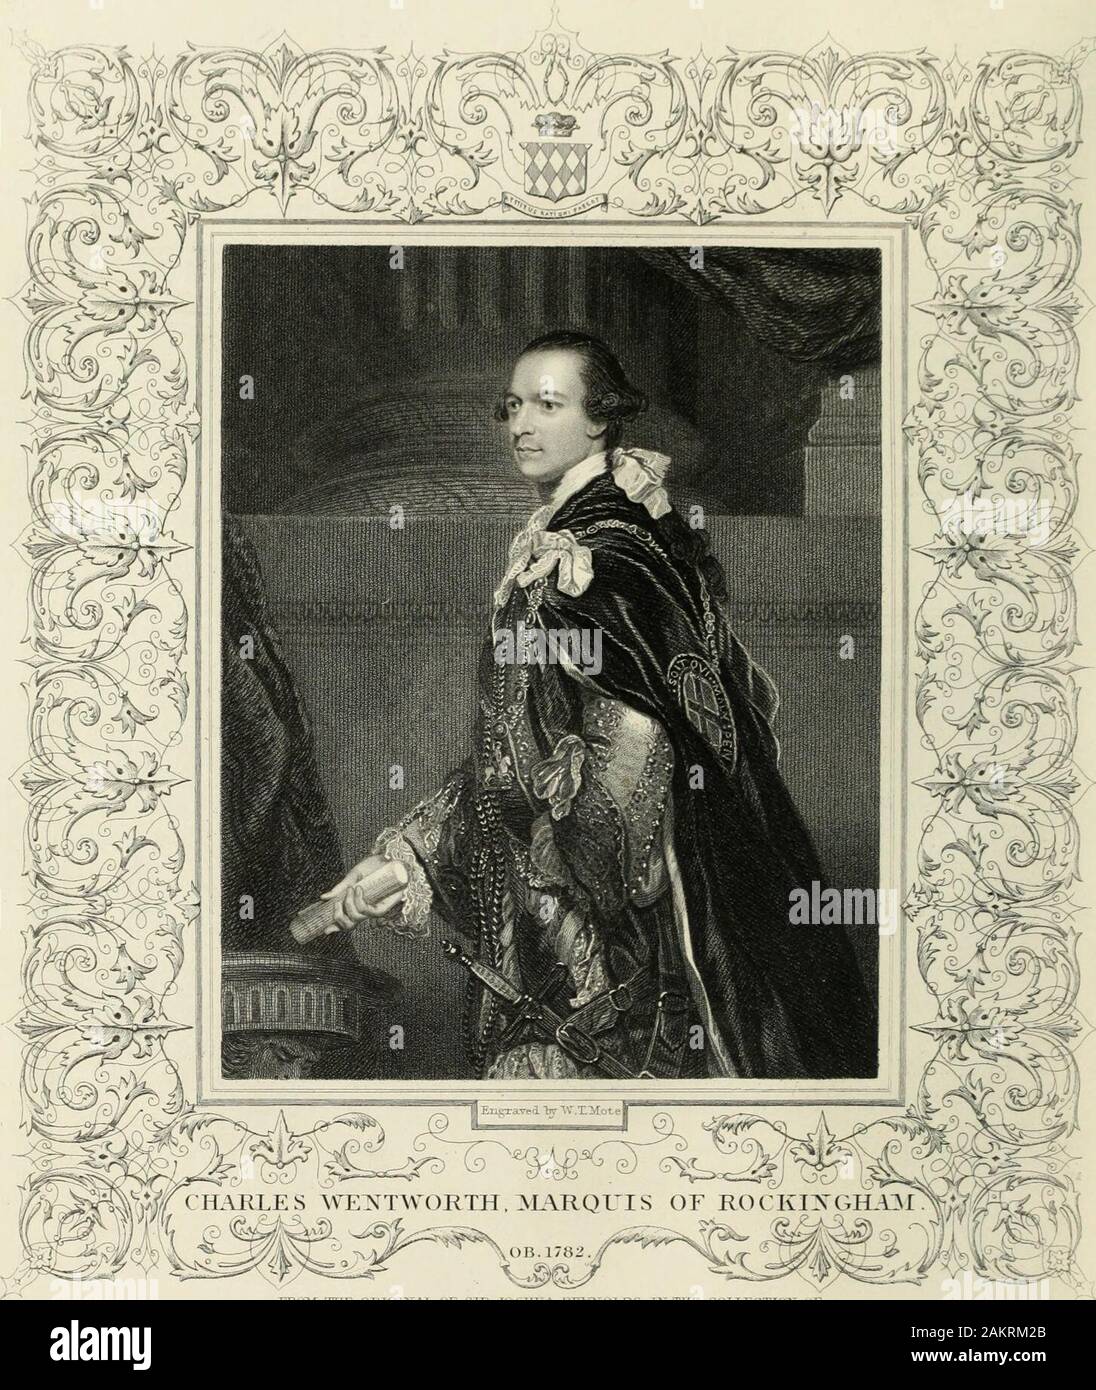 Portraits of illustrious personages of Great Britain : Engraved from authentic pictures in the galleries of the nobility, and the public collections of the countryWith biographical and historical memoirs of their lives and actions . of Great Britain, by thestyle and title of Baron Hawke of Towton, in the County of York. By his marriage with Catherine,daughter and sole heiress of Walter Brooke, Esq., of Burton Hall, Yorkshire, and co-heiress of WilliamHammond, Esq., of Scarthingwell Hall, in the same county, he had three sons and one daughter. HisLordship died at his seat at Sunbury, in Middles Stock Photo